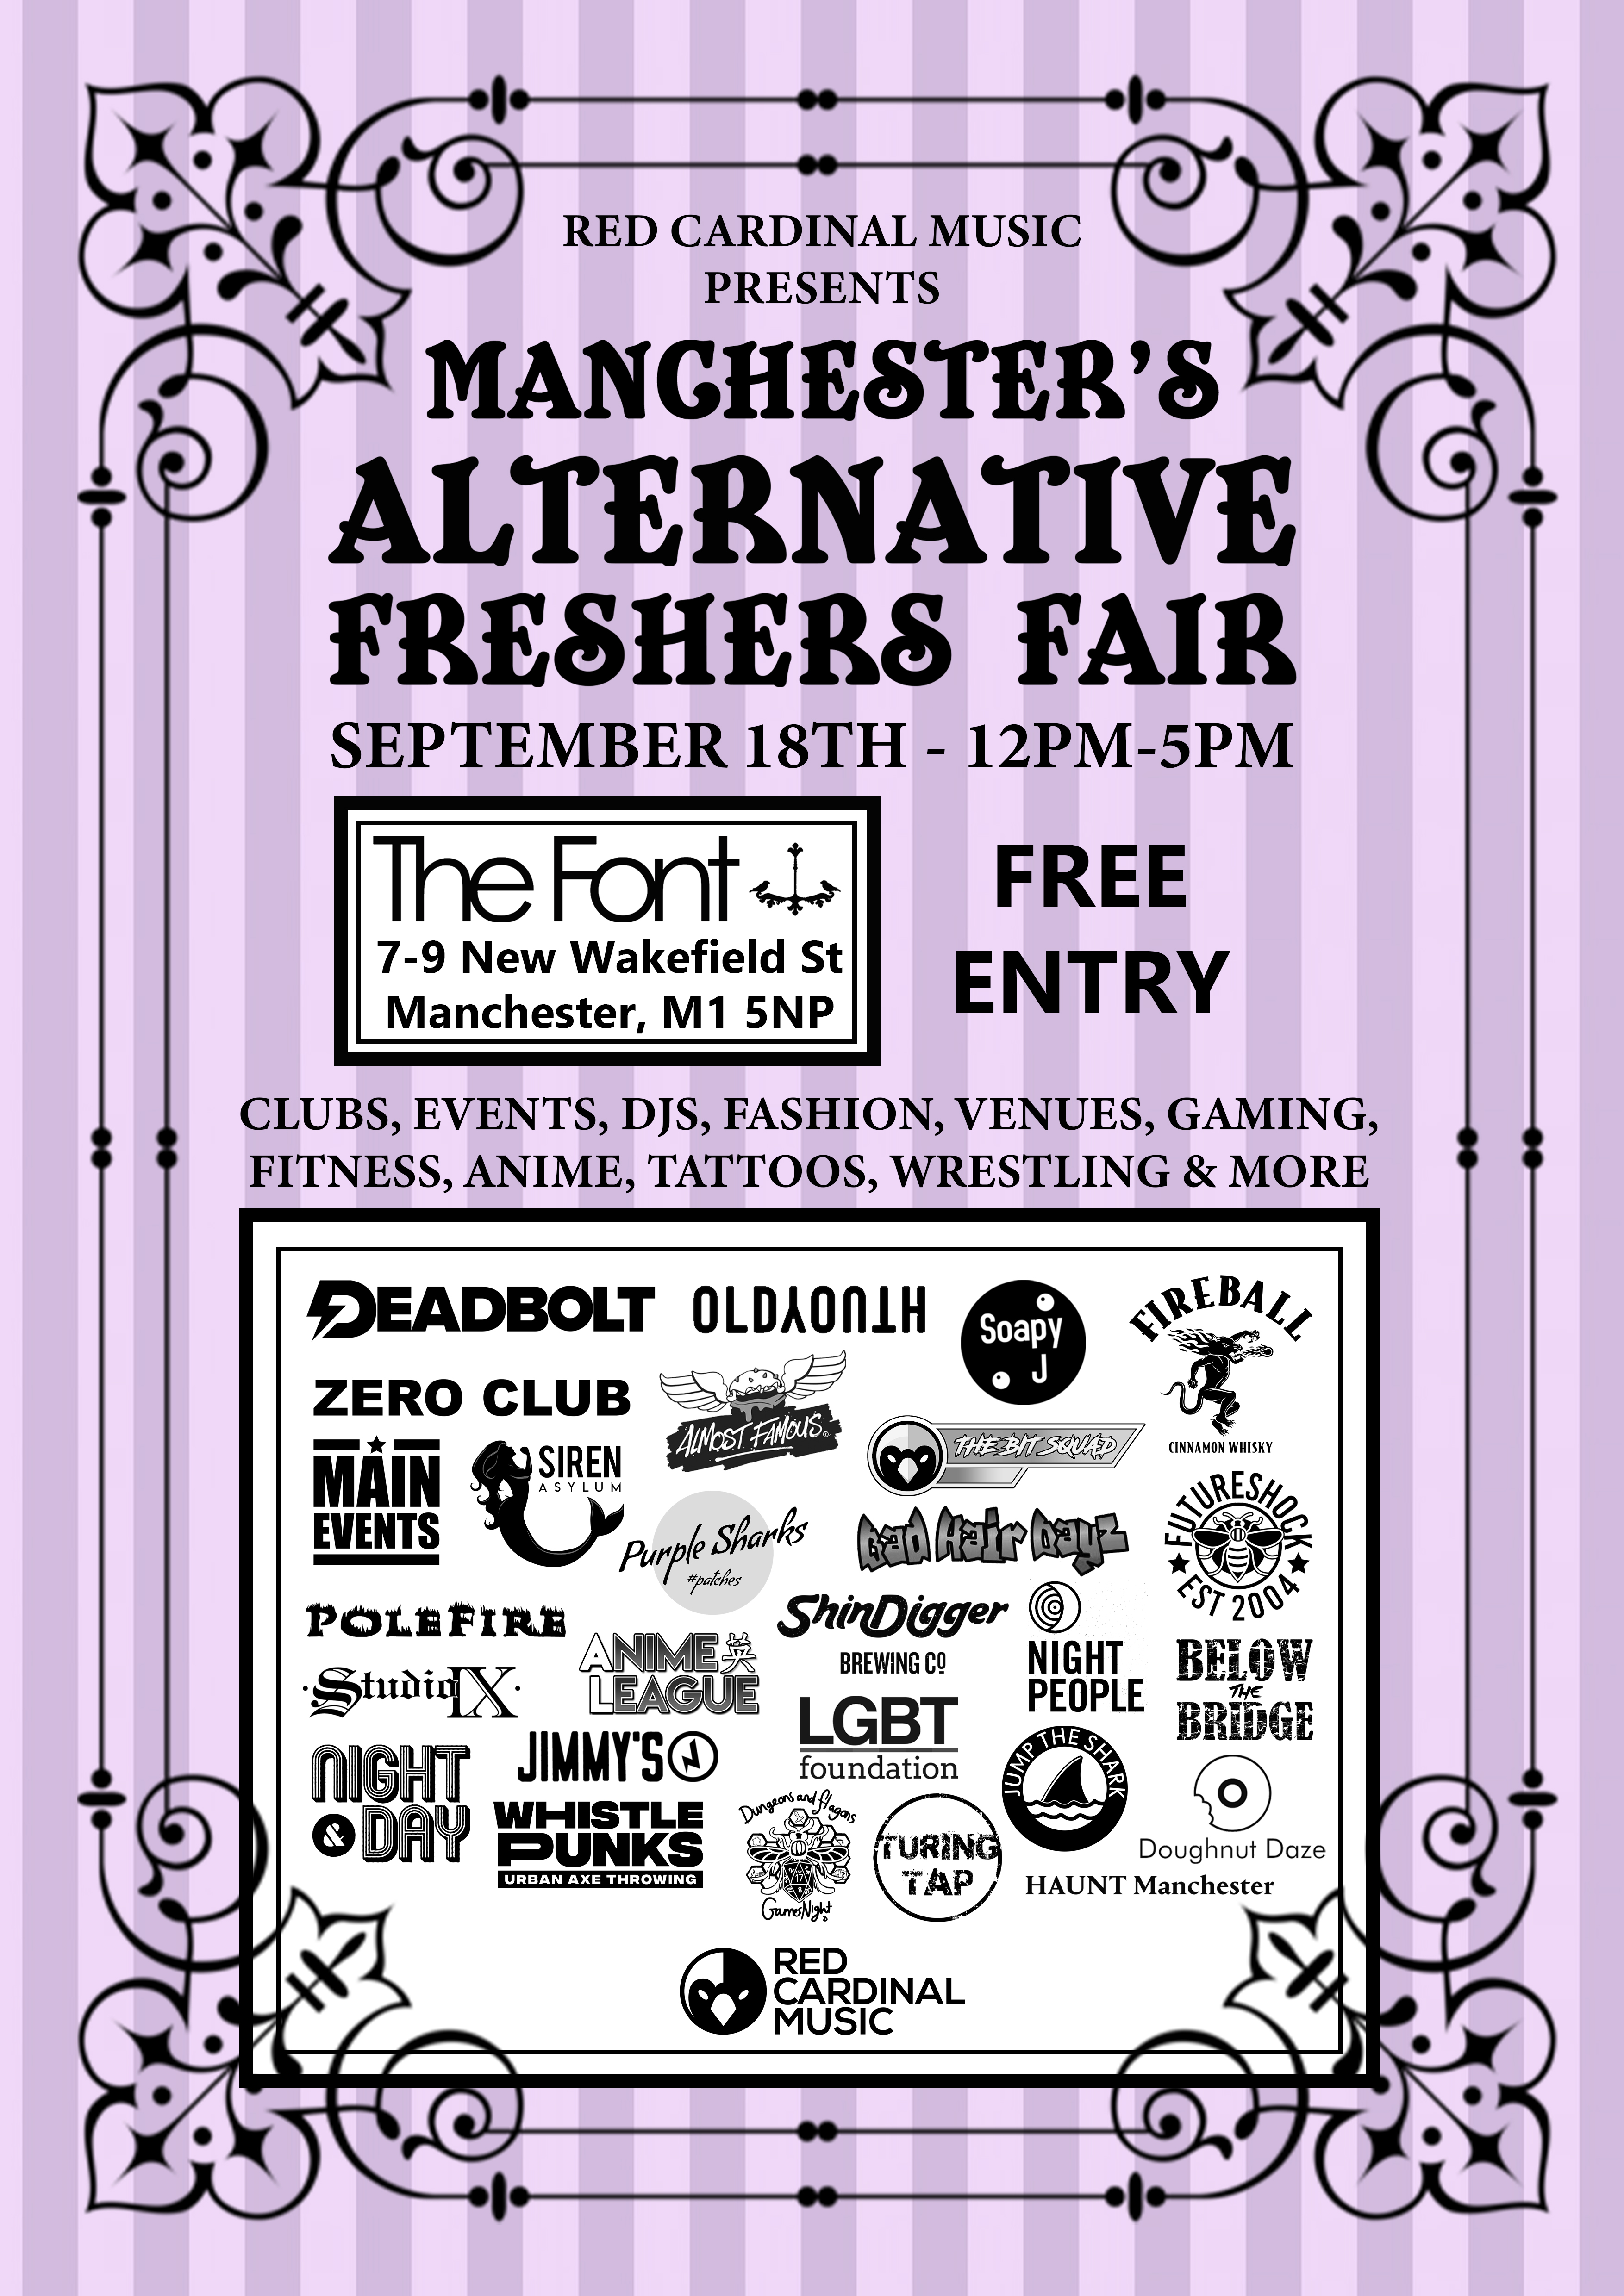 Red Cardinal Music Freshers Fair 2019 - Font Manchester - RGB For Web